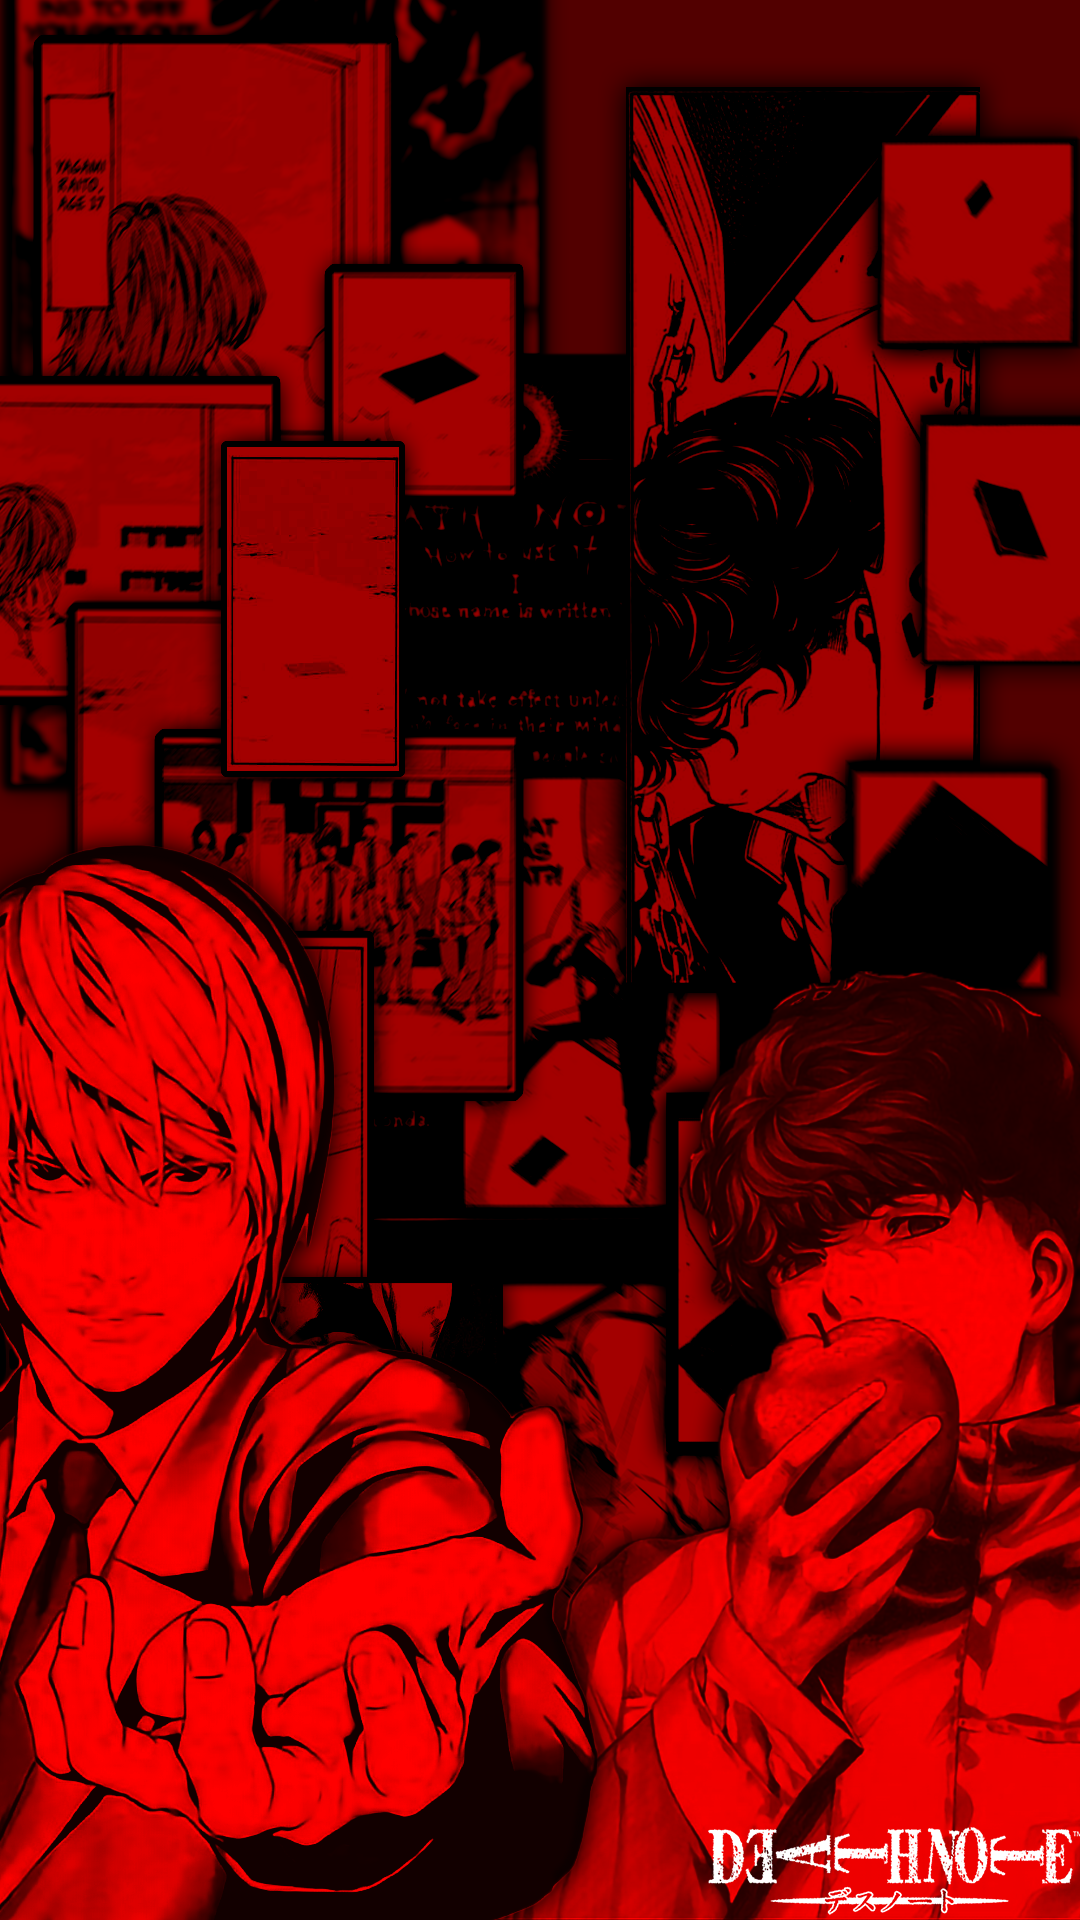 Every Kira Has The Same Fate A Wallpaper Made For Death